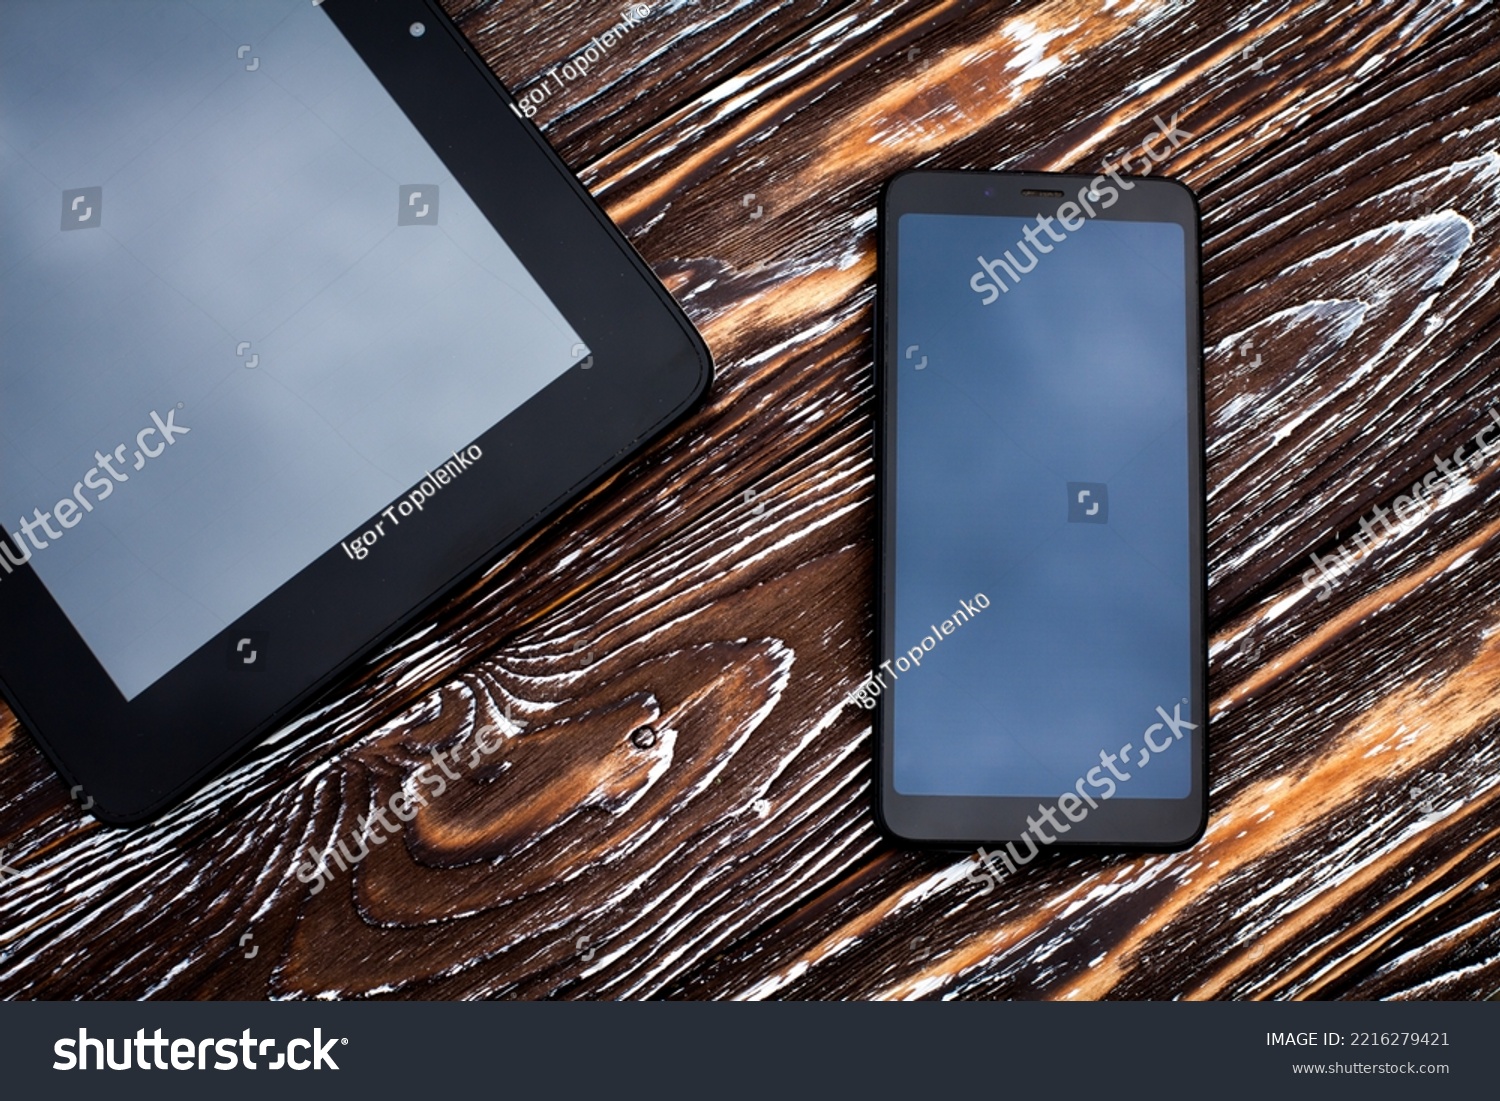 Two black devices, a tablet and a mobile phone lie on a dark wooden textured surface. #2216279421